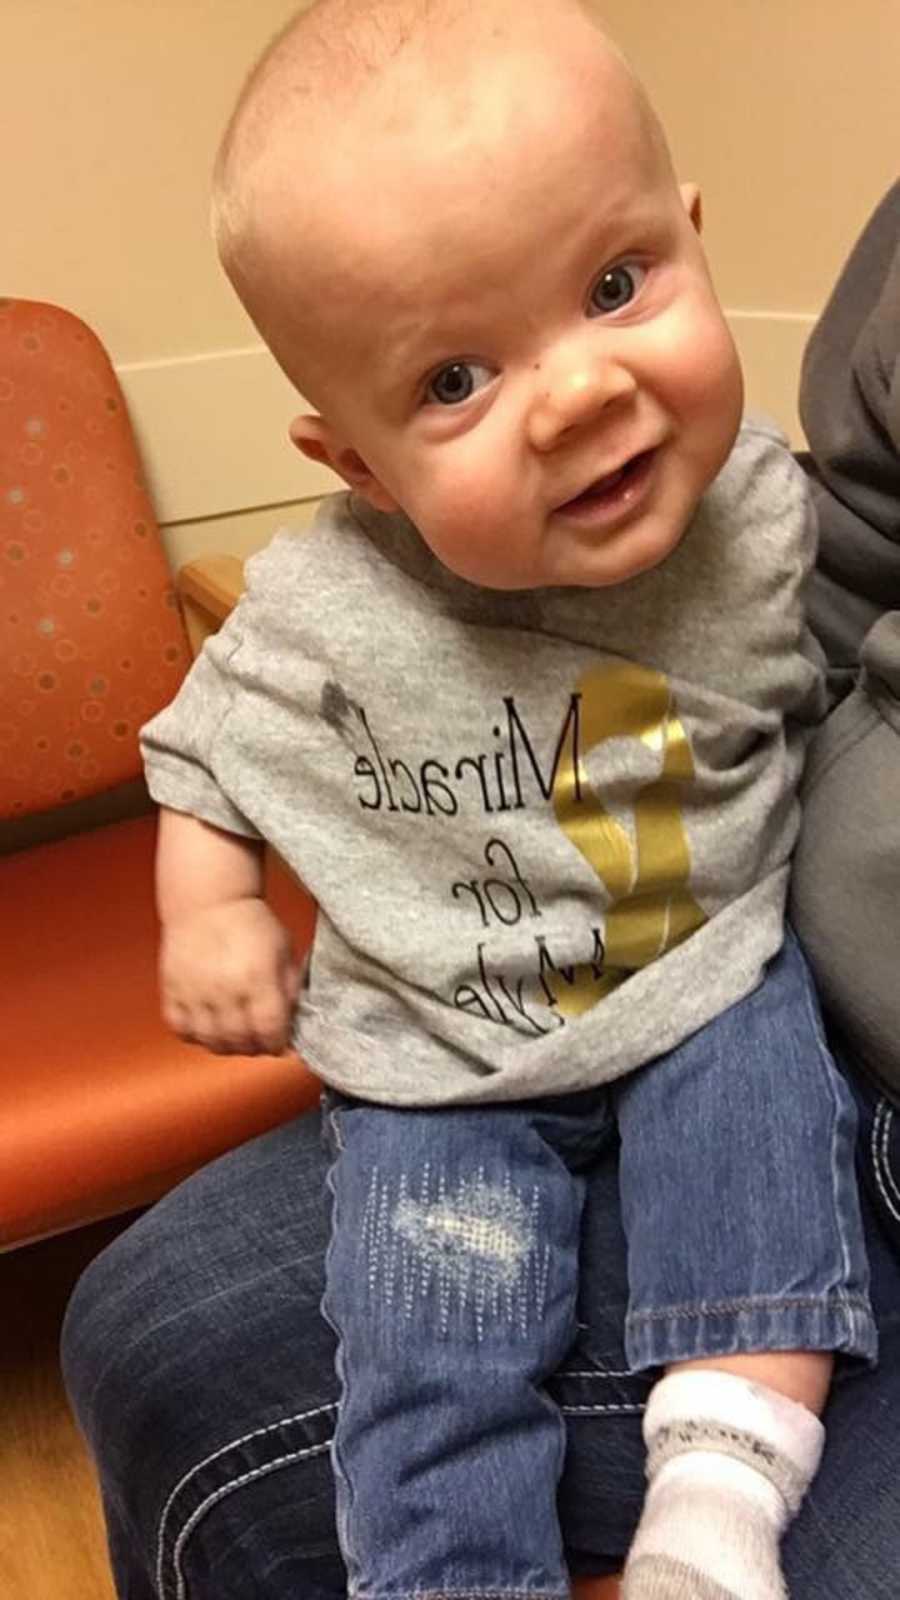 Little boy who has stable tumor smiles while sitting on parent's lap in doctor's office